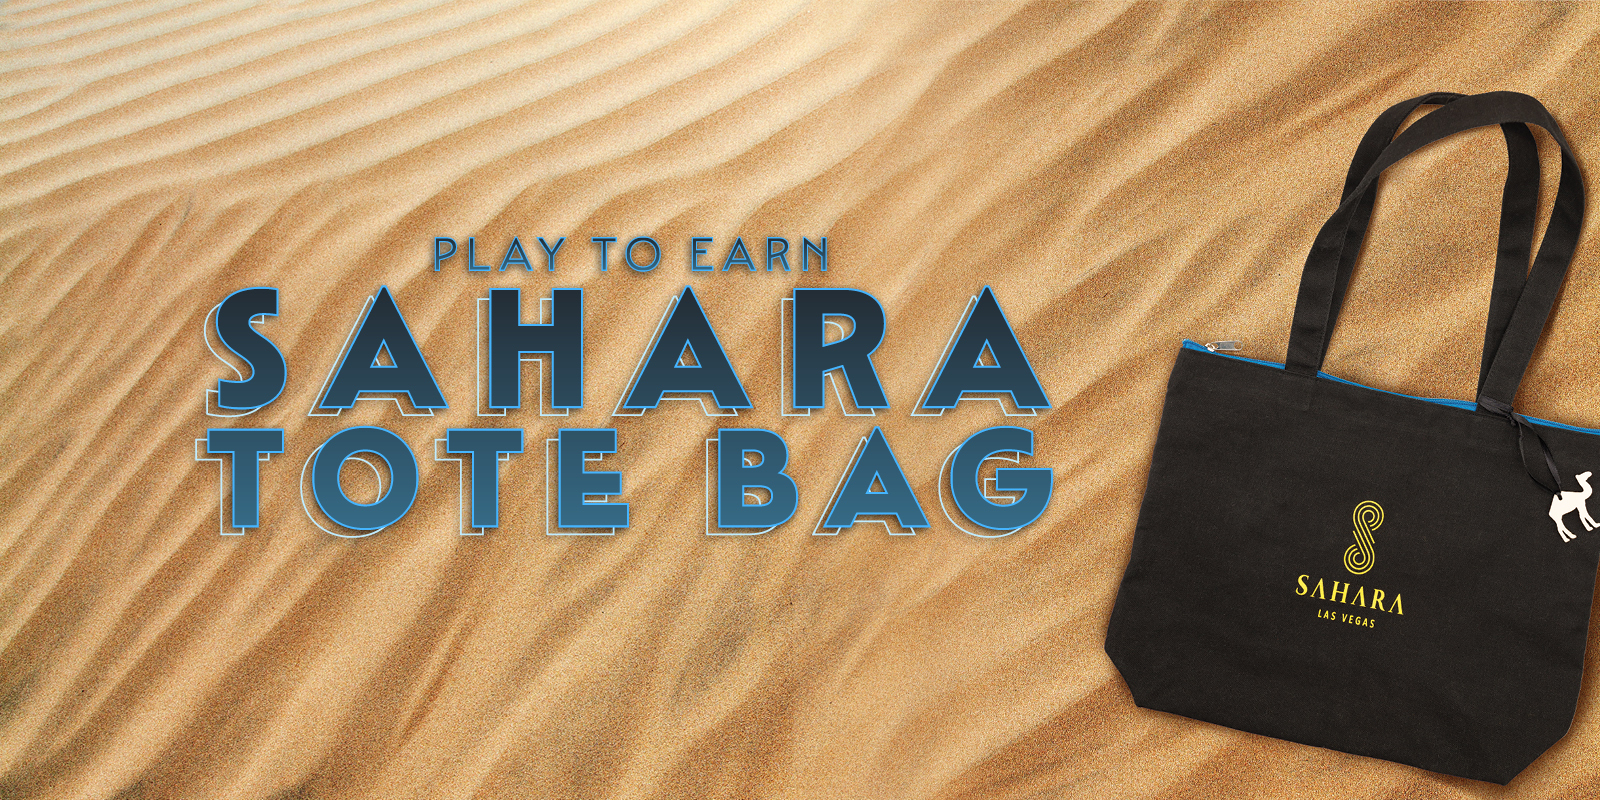 Play to earn SAHARA tote bag creative showing a black branded bag and a sand background